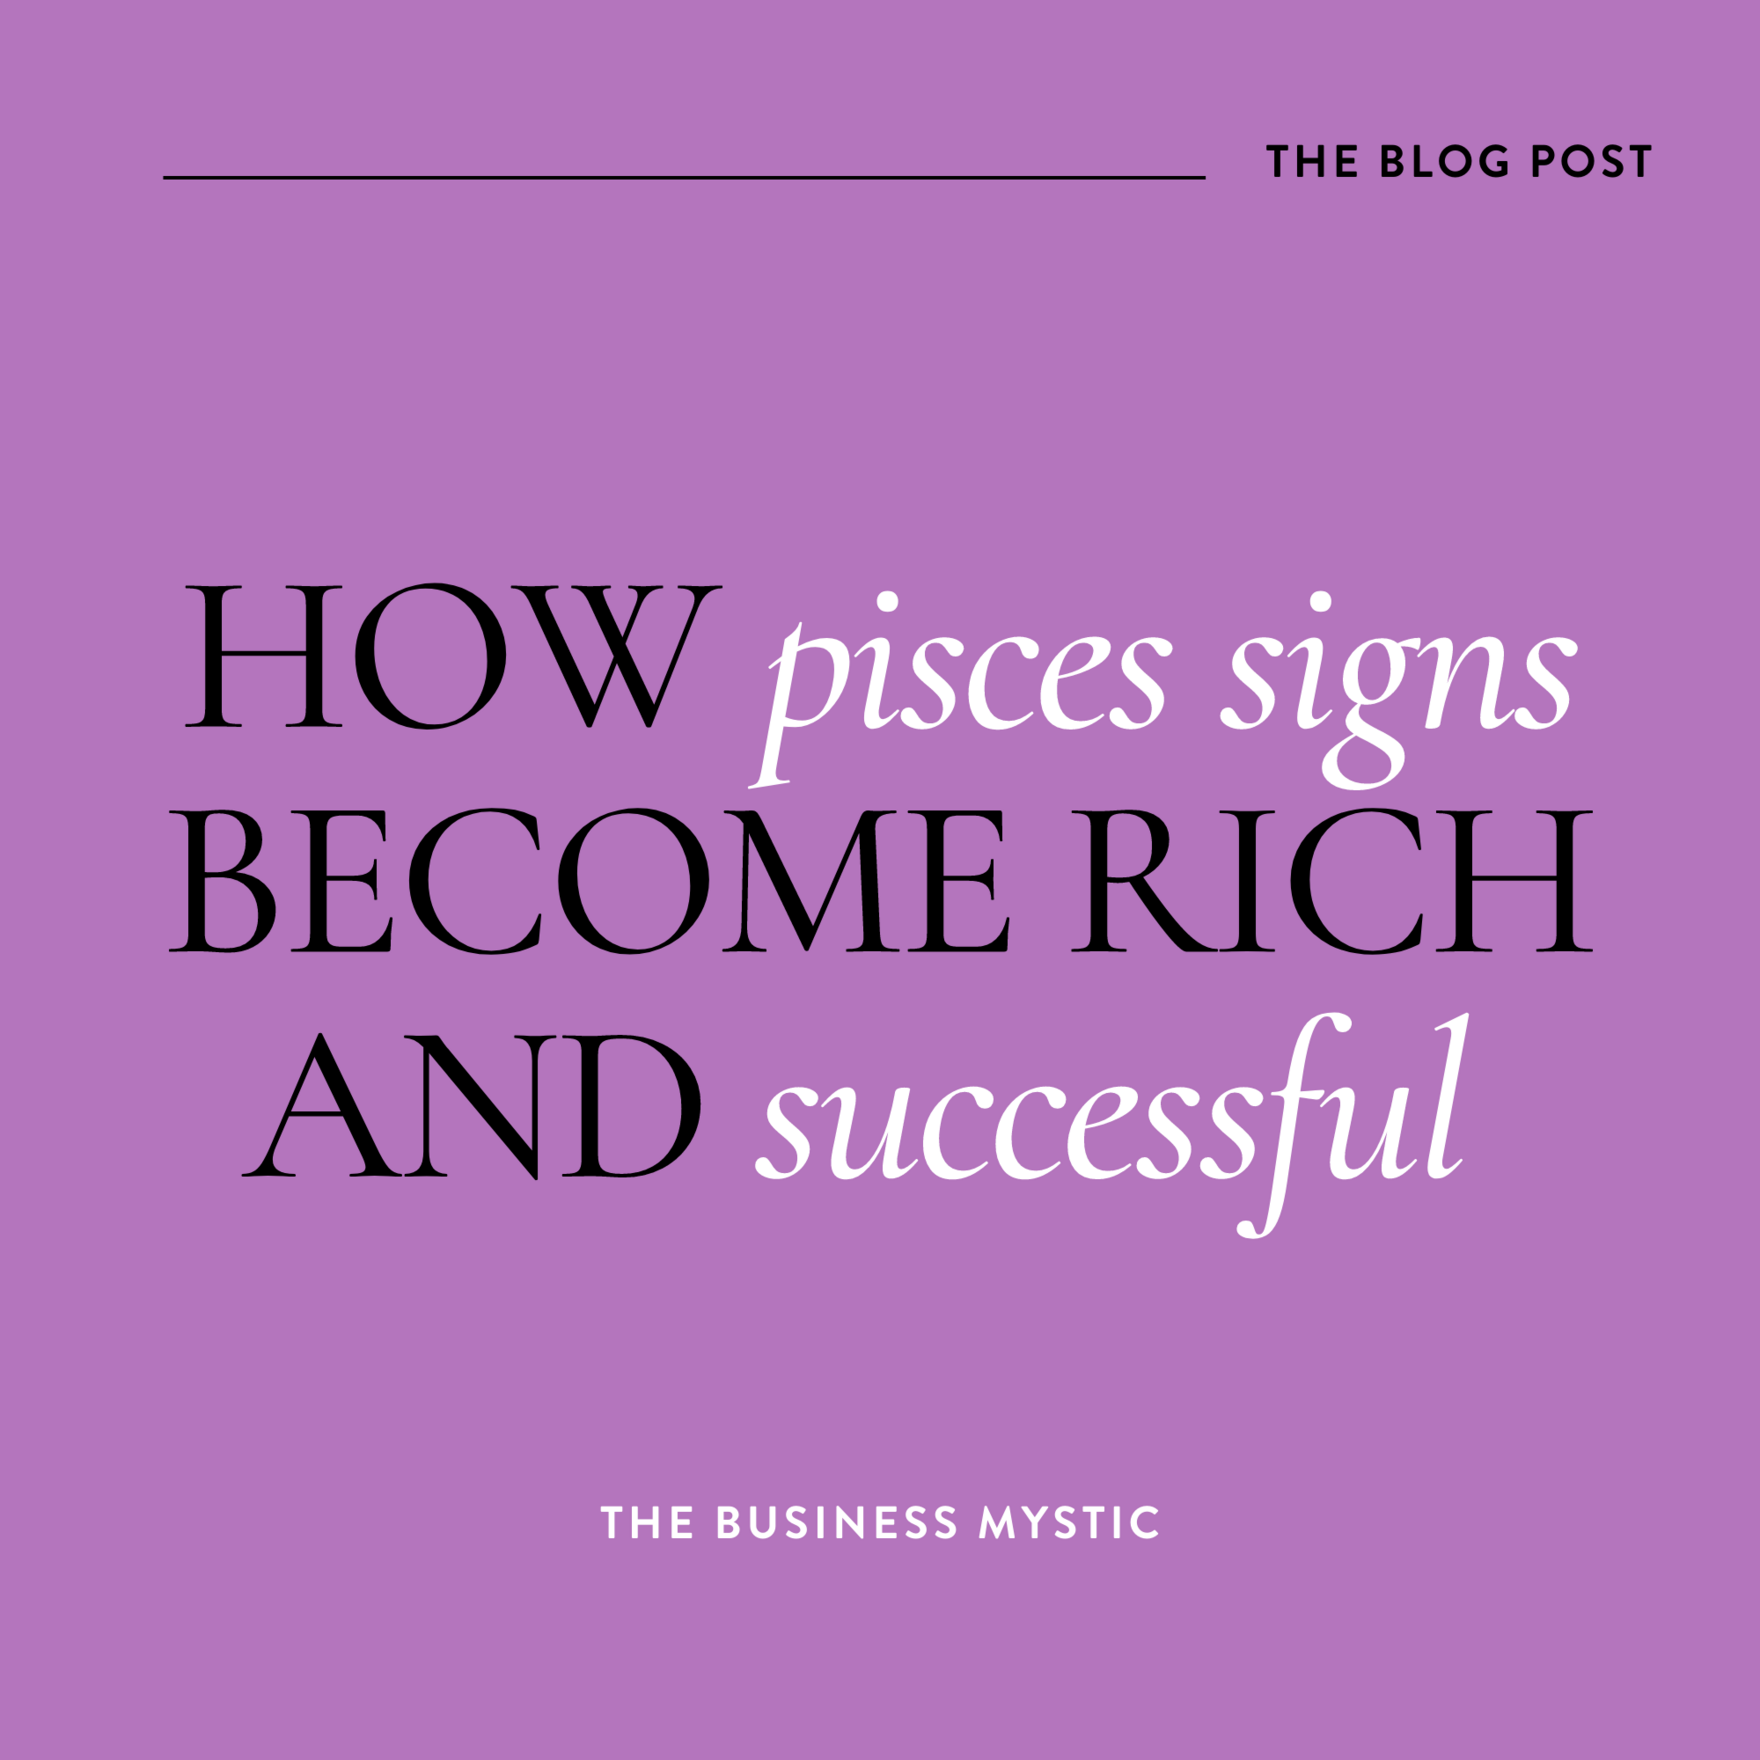 Pisces As Business Owners